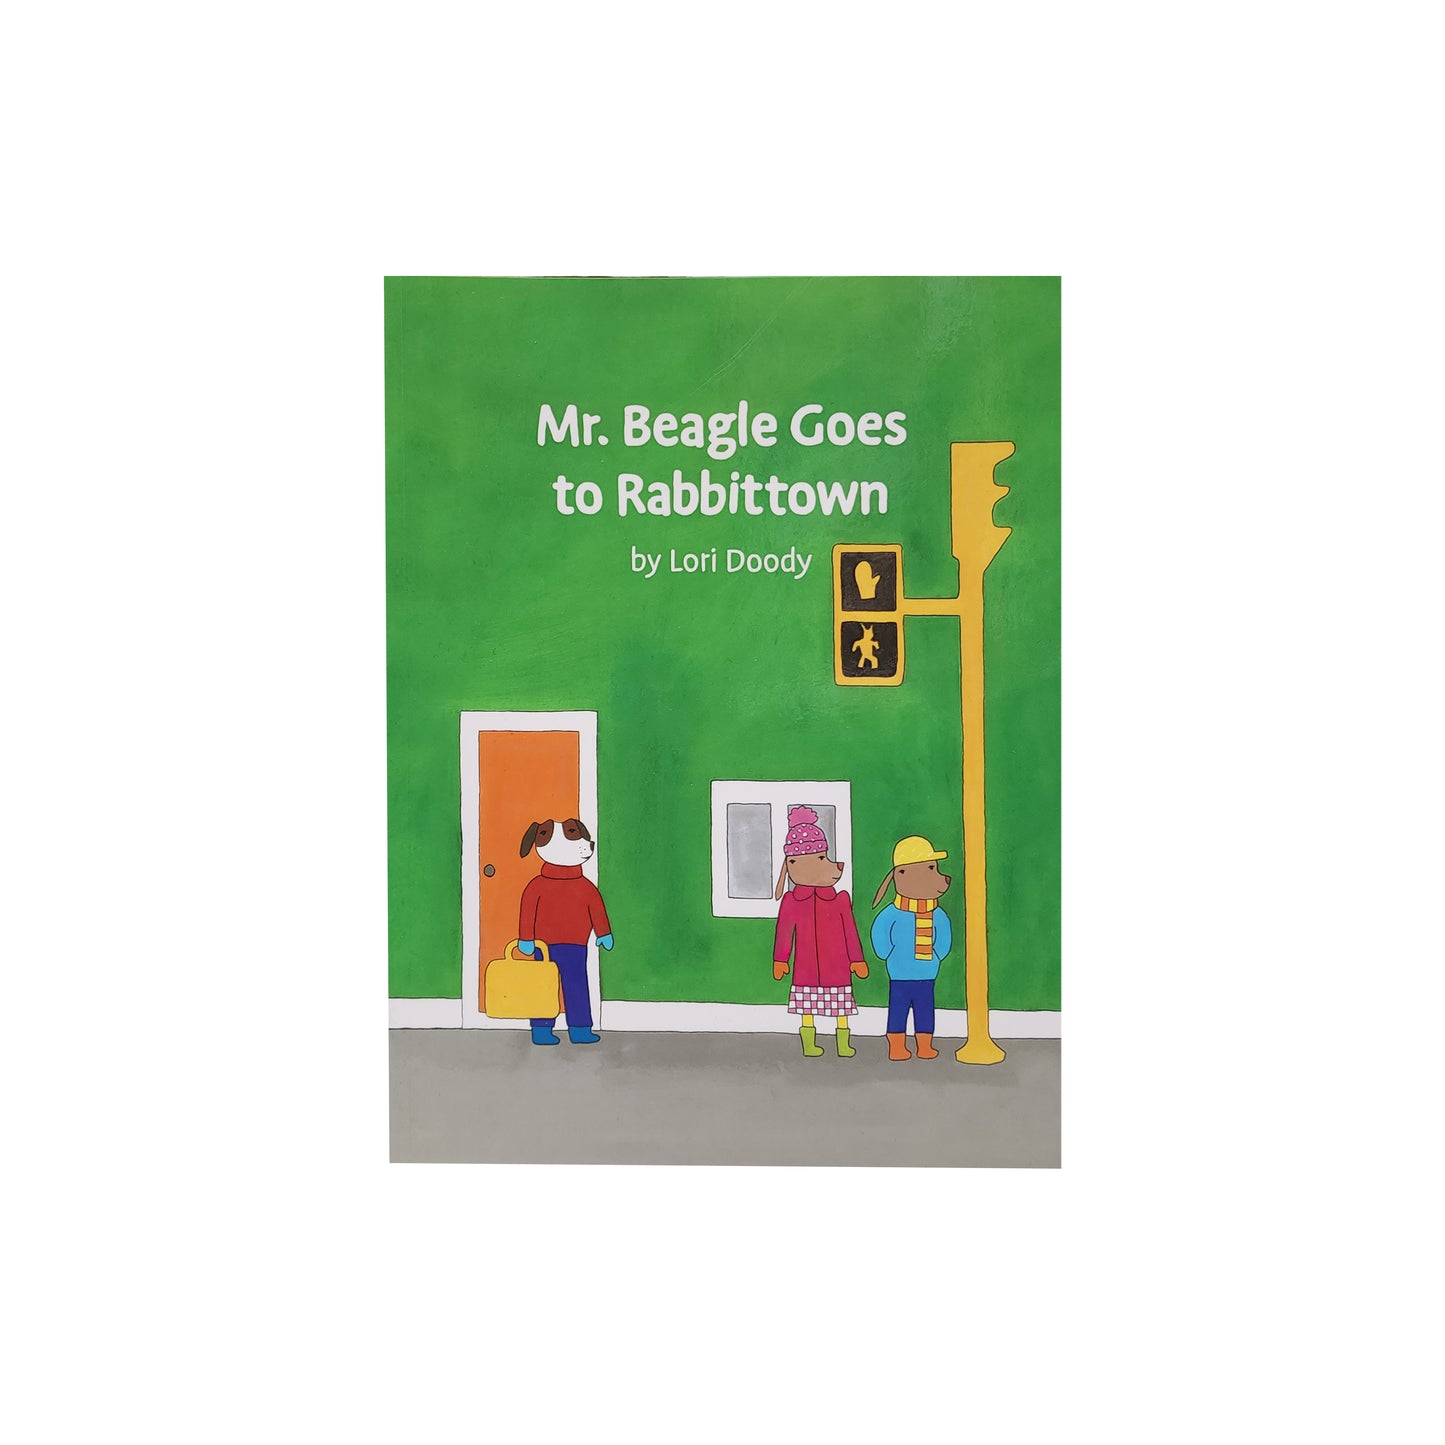 Mr. Beagle Goes to Rabbittown